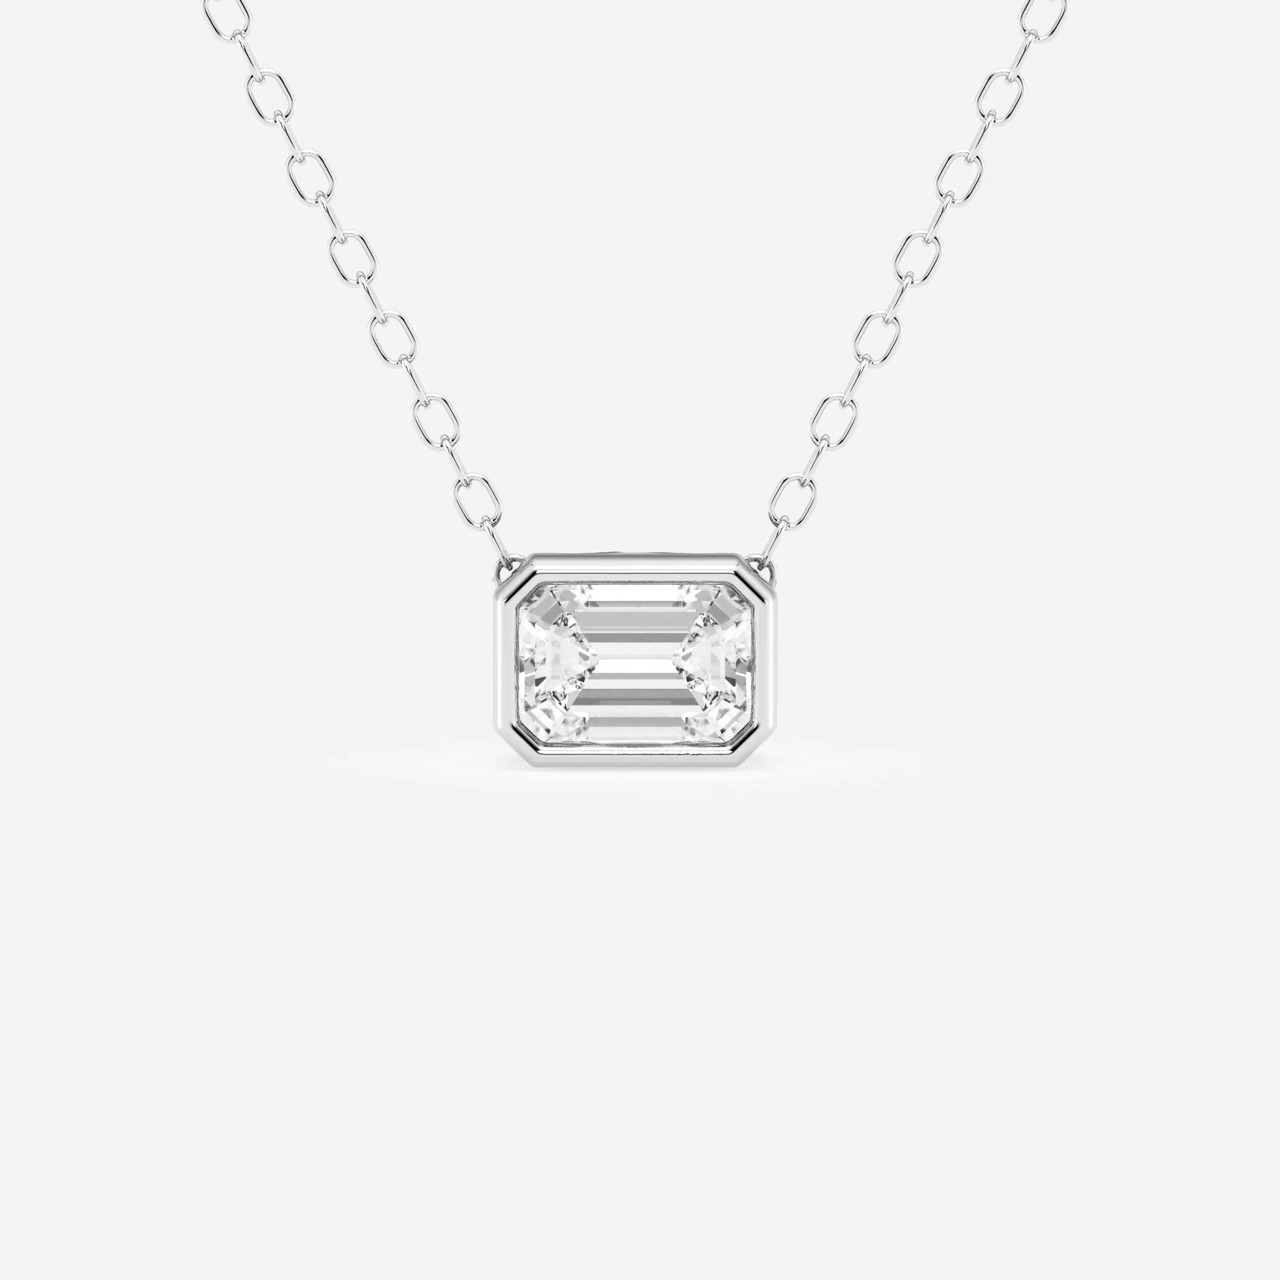 Buy Diamond Necklace, Emerald Cut Diamond Pendant, Pendant With Baguettes,  14kt Yellow Gold Necklace, April Birthstone Baguette Necklace Online in  India - Etsy